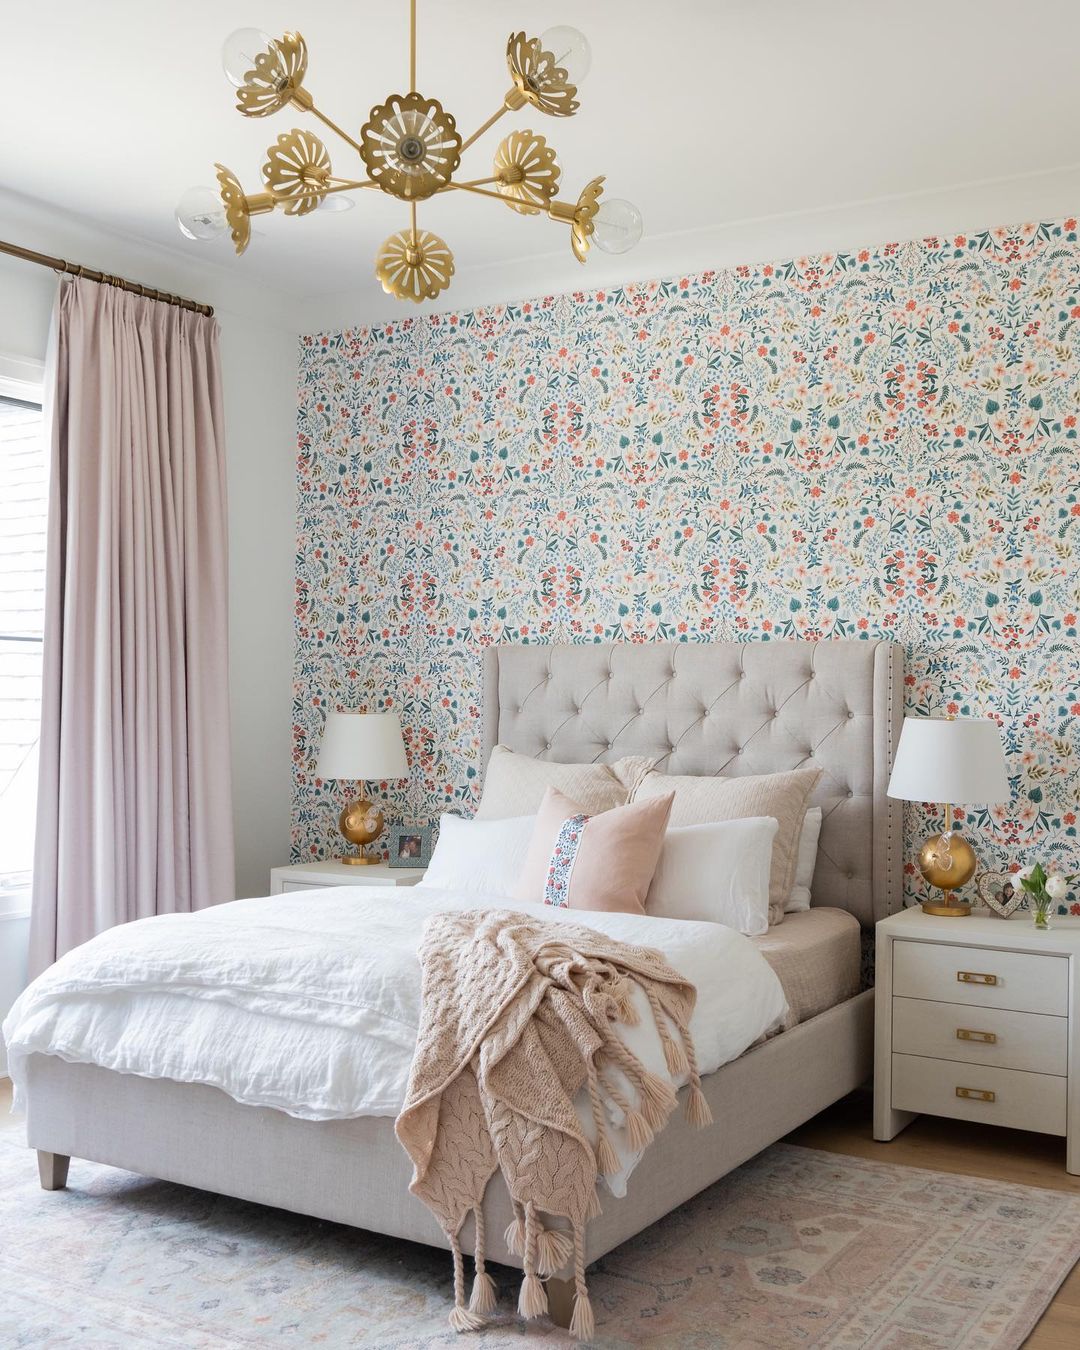 a bedroom with high ceilings and a large bed, the wall behind the bed has colorful, patterned wallpaper